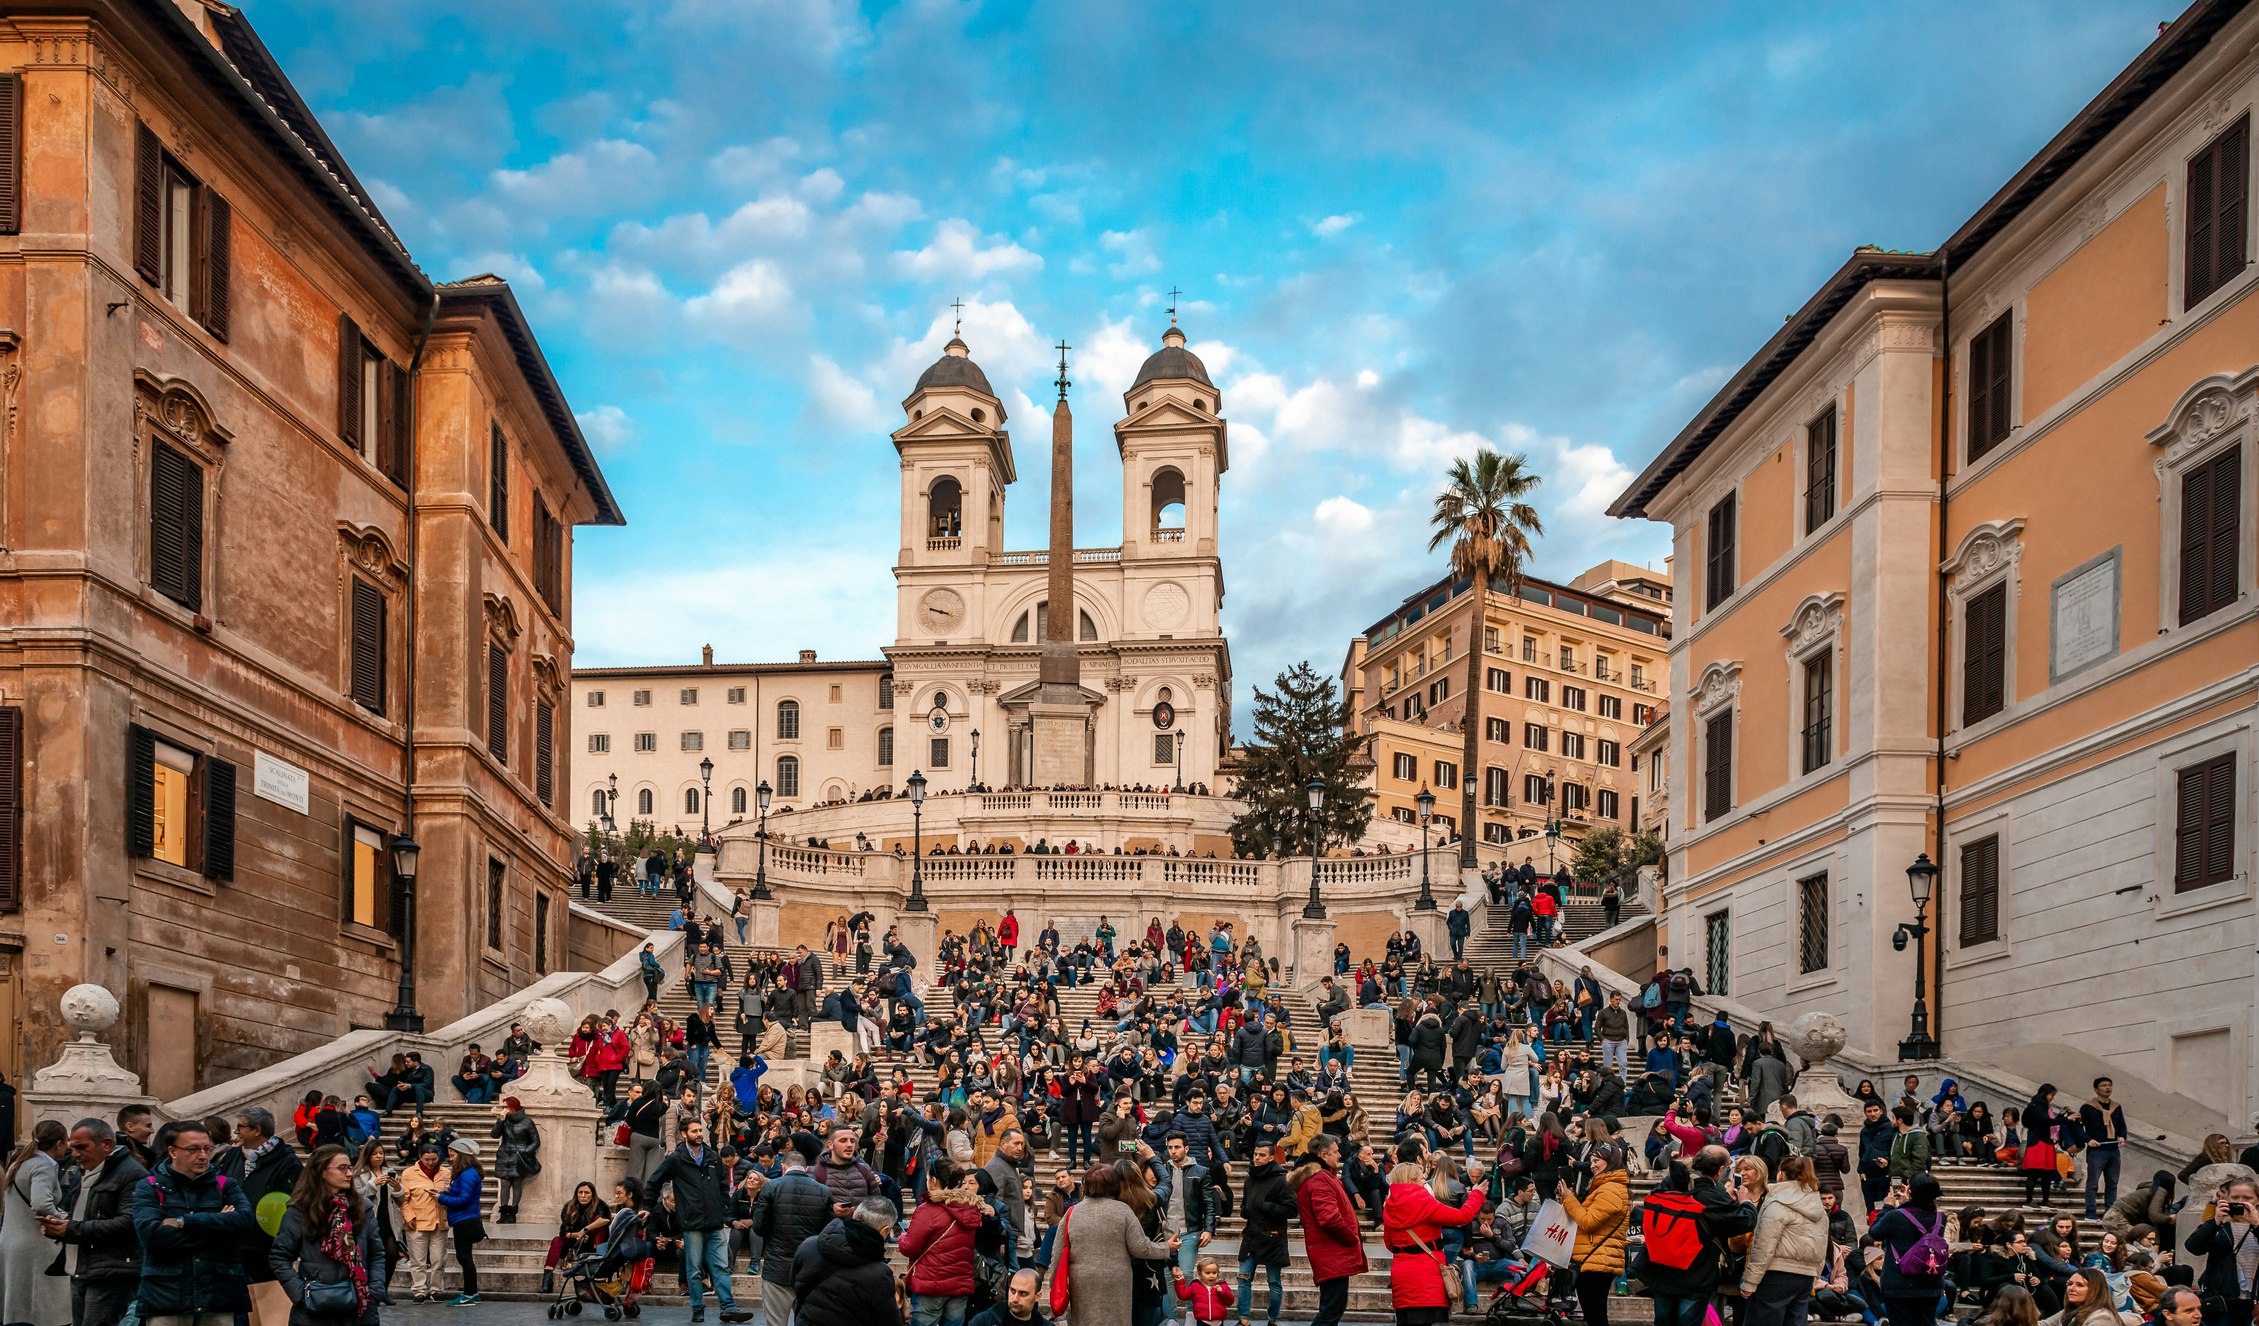 View of the crowded Spanish Steps with the church of the Santissima Trinita dei Monti and the Egyptian obelisk in the background.